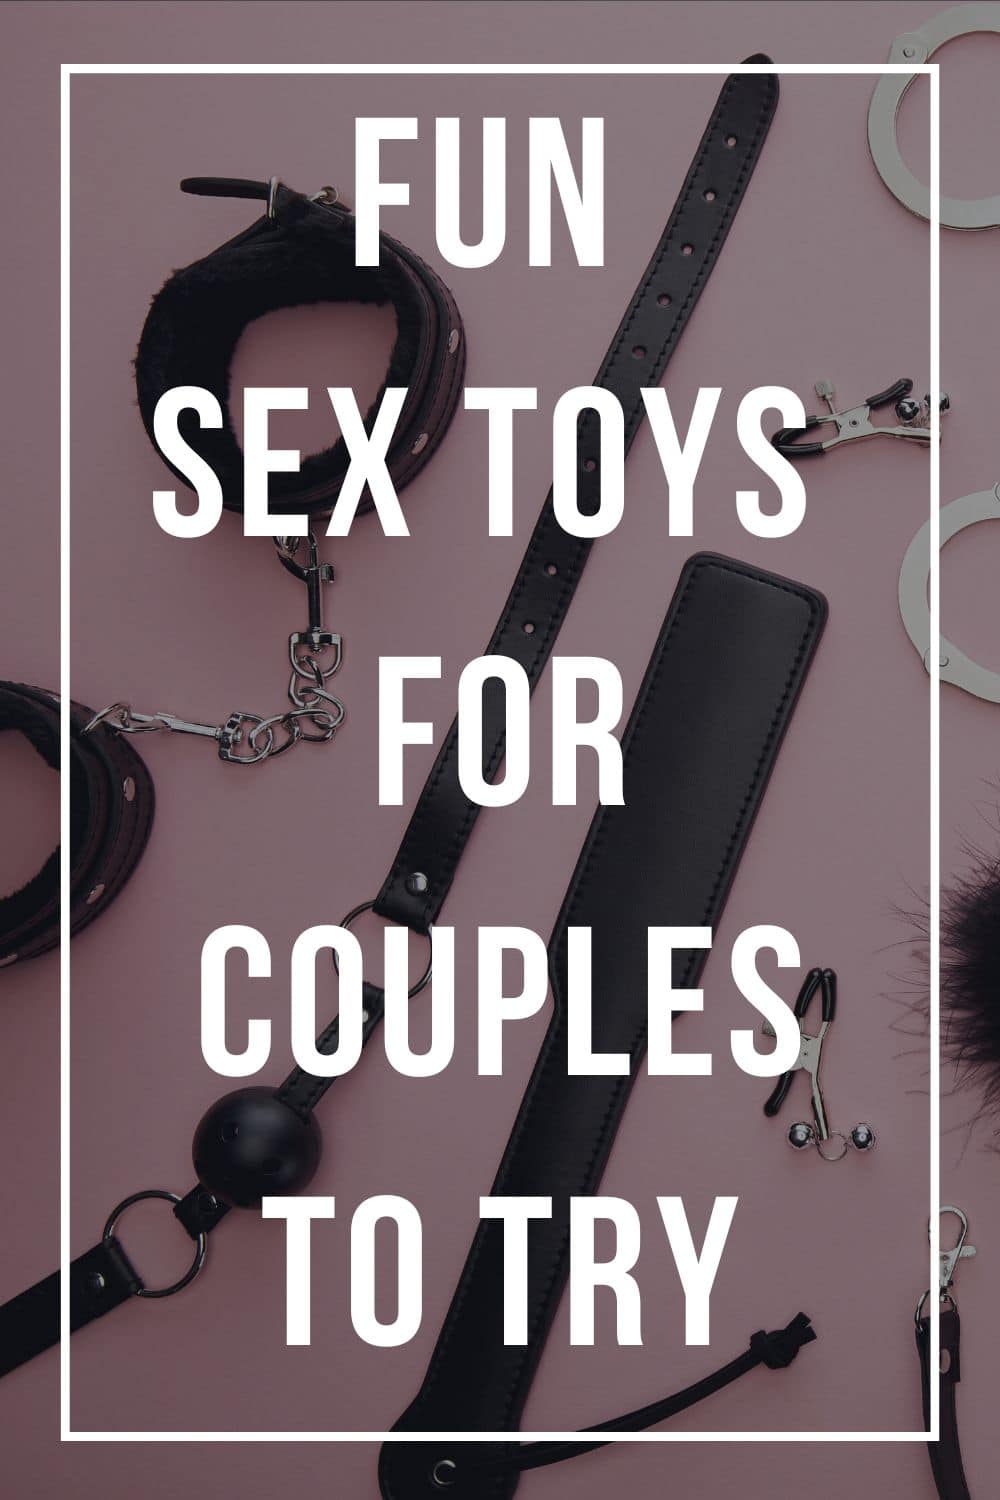 Fun Sex Toys for Couples: 8 Ideas for Your Bedroom Collection